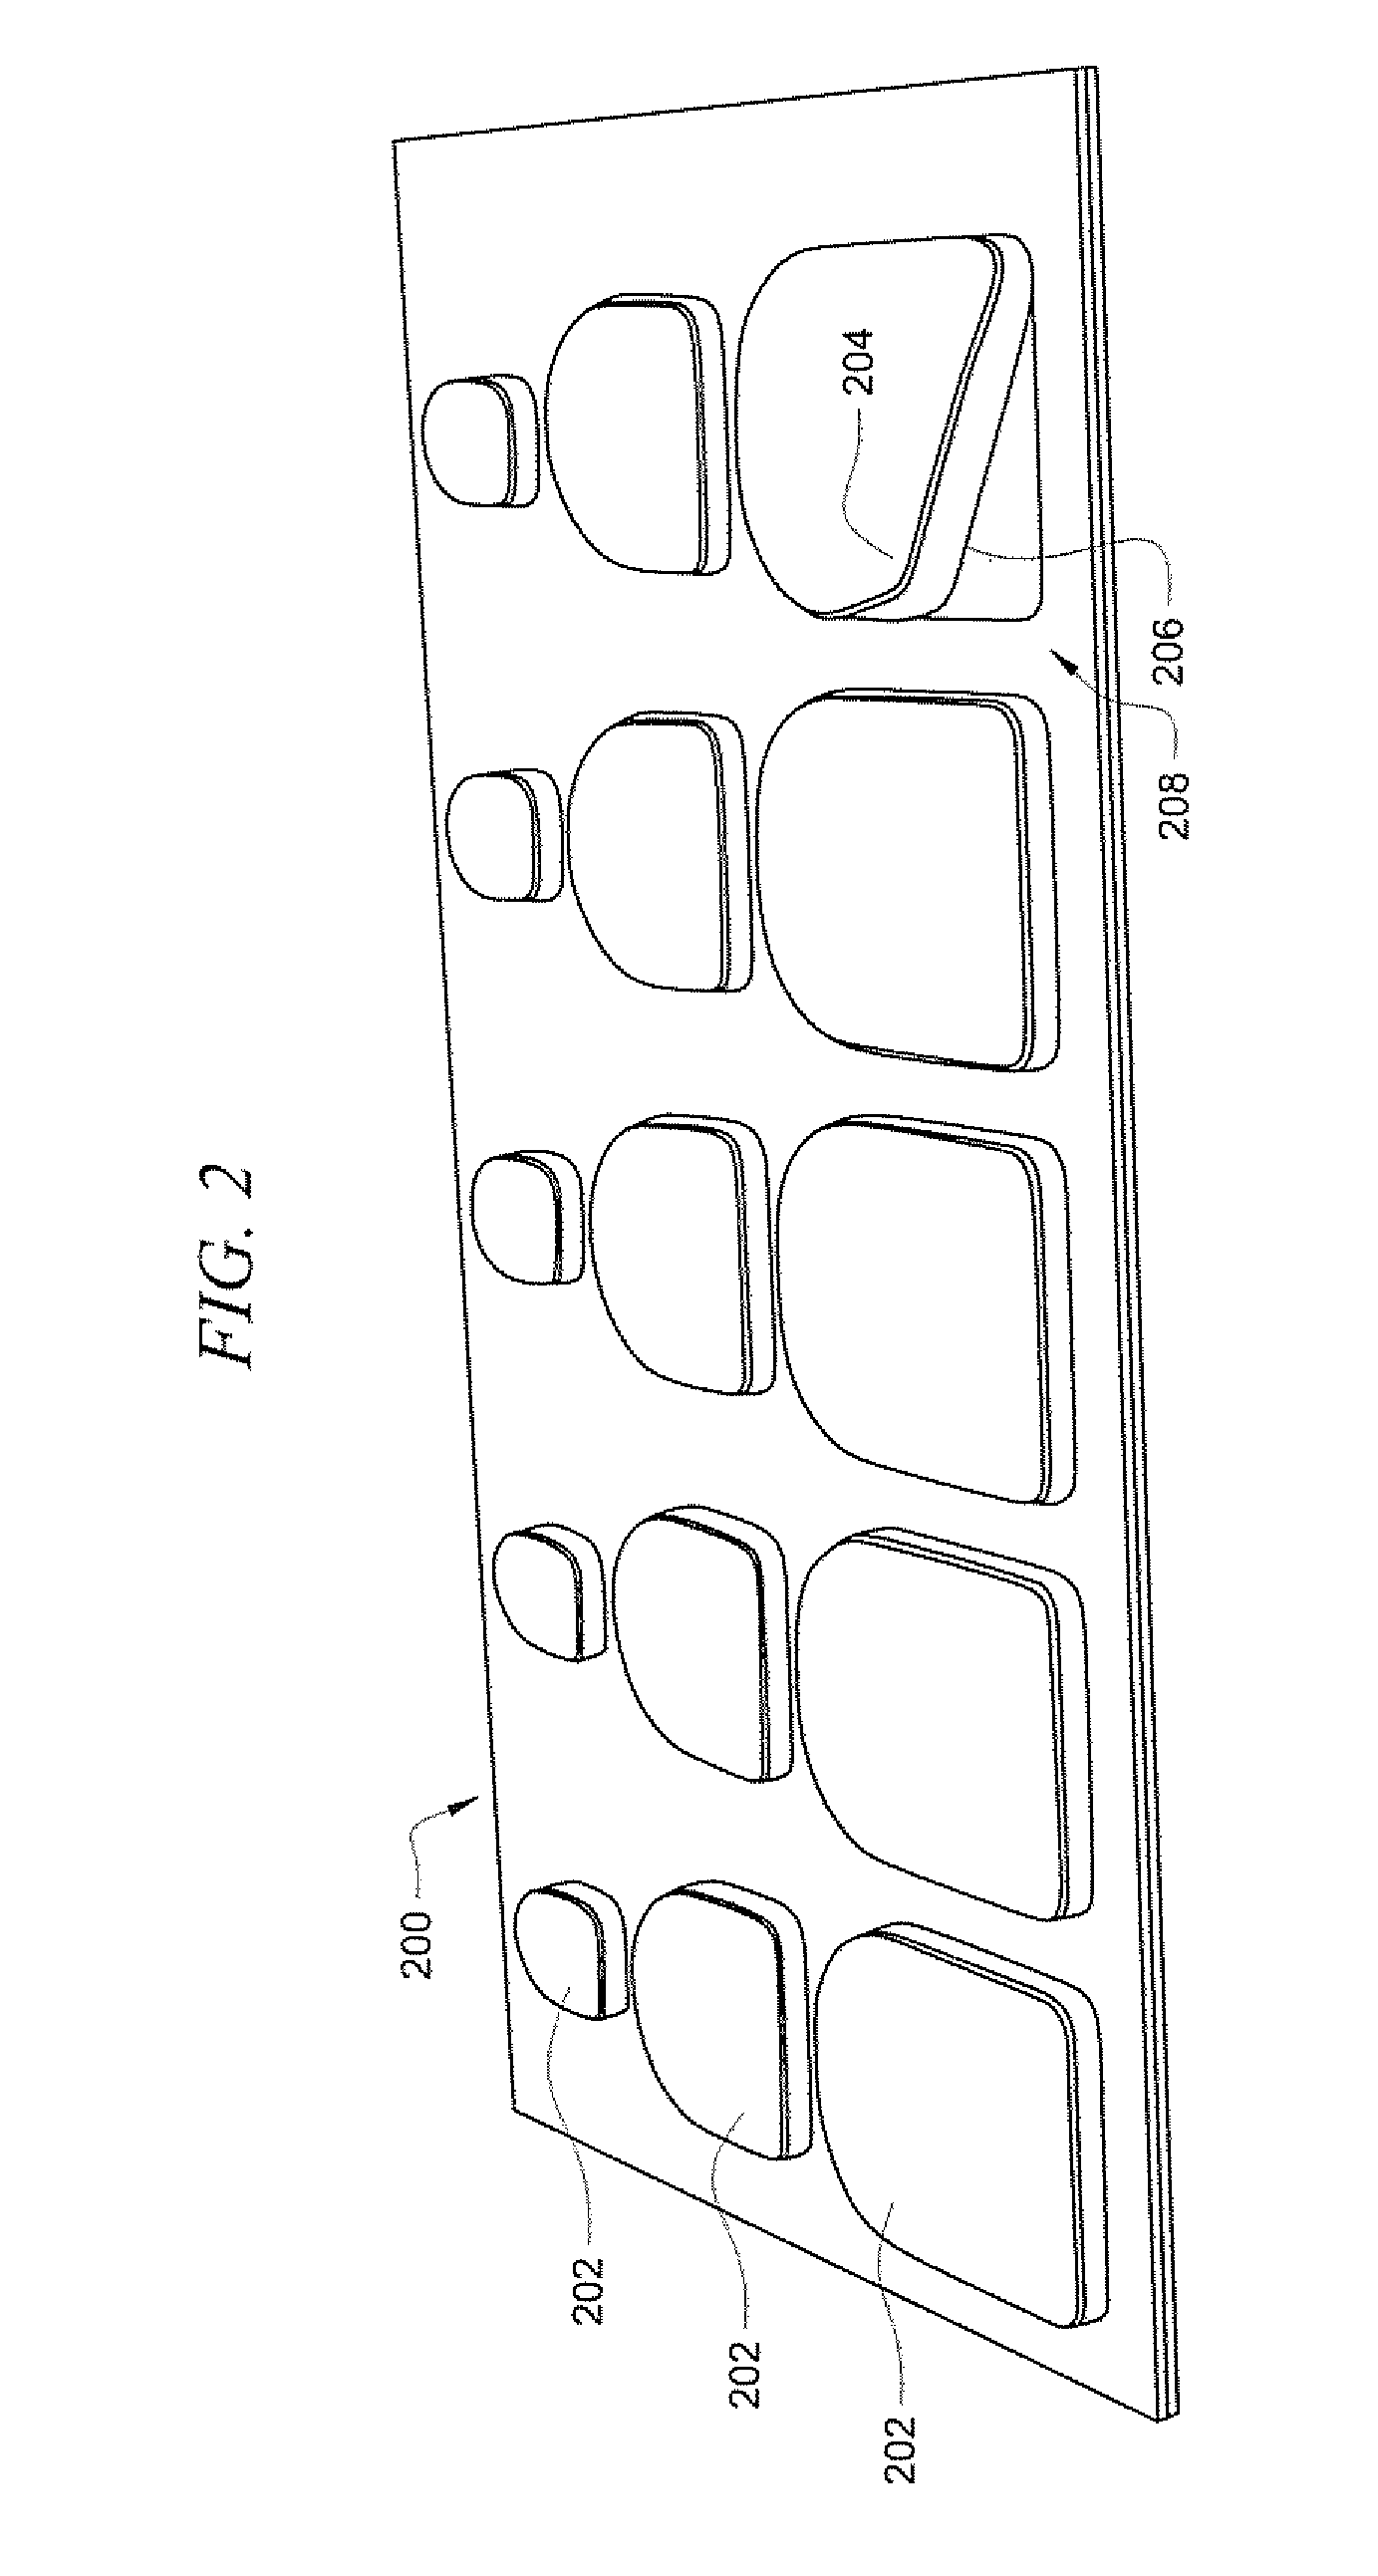 Systems and methods for treating nail-bed fungus through application of heat